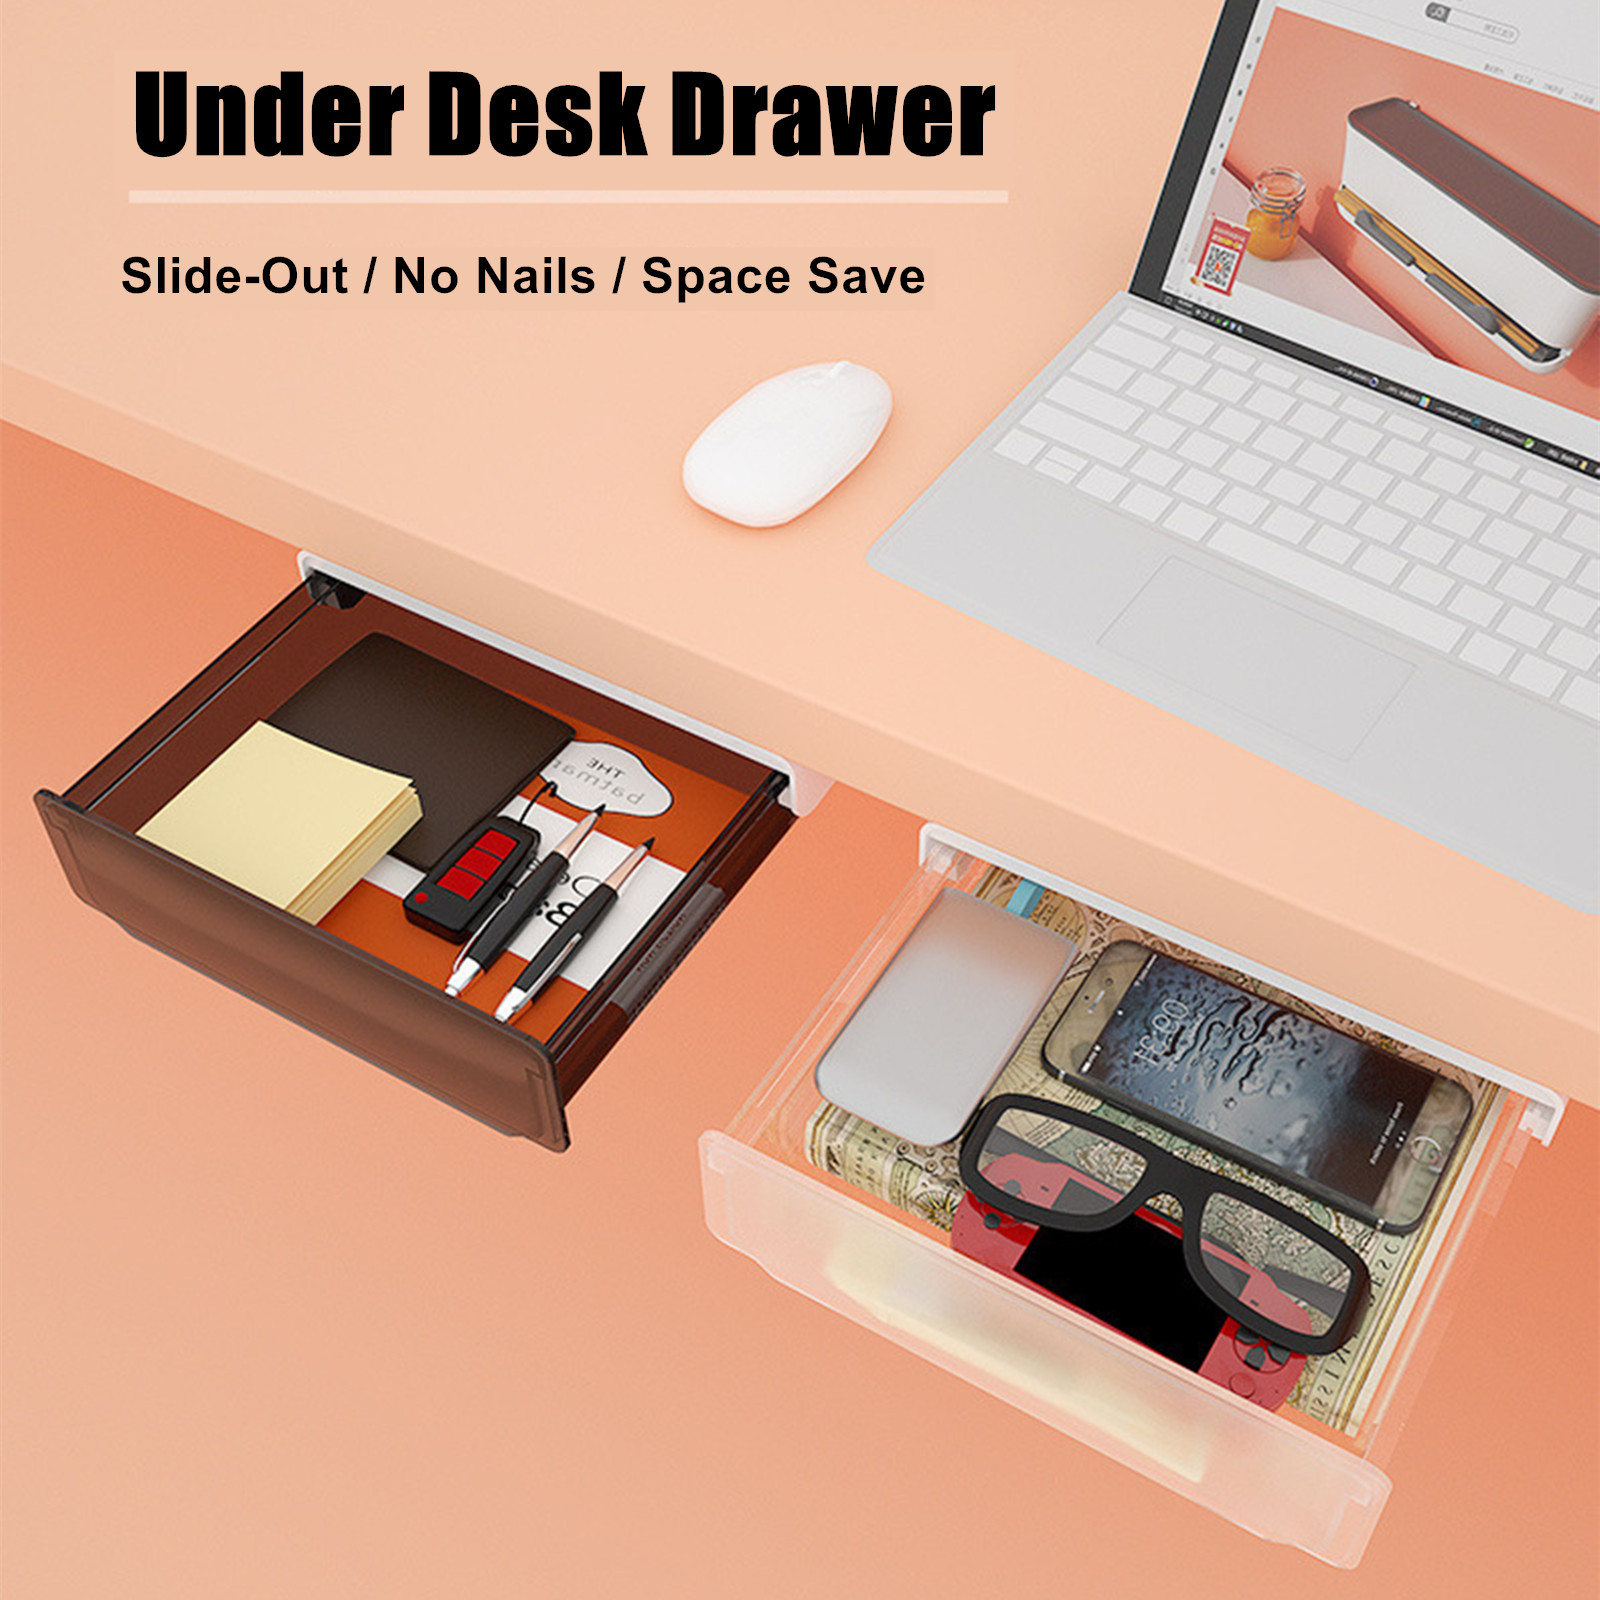 Under Desk Drawer Slide-out Large Office Organizers and Storage Drawers – Large, Black